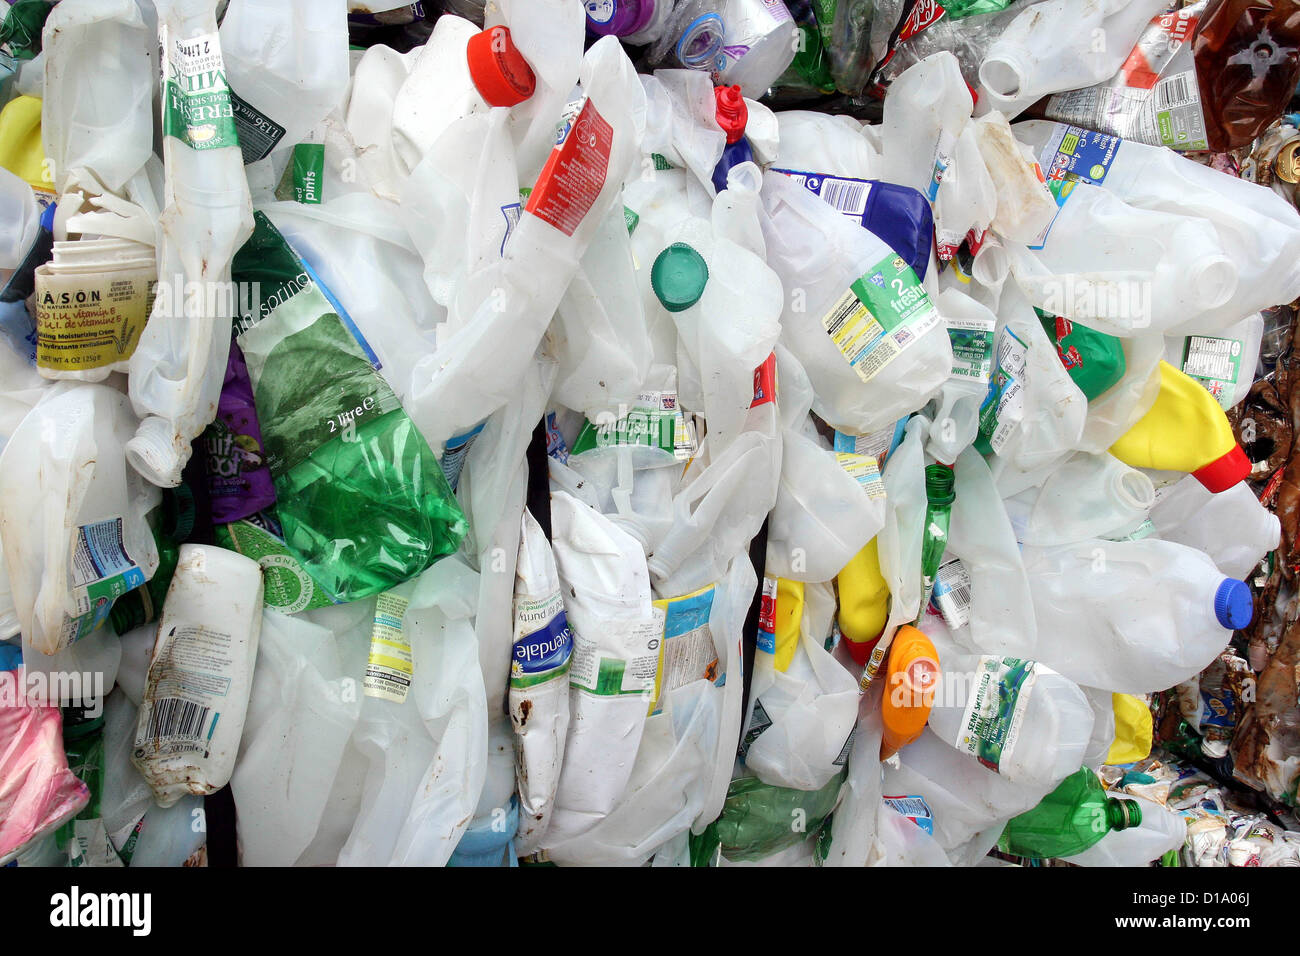 https://c8.alamy.com/comp/D1A06J/a-bale-of-plastic-milk-containers-and-other-plastic-bottles-ready-D1A06J.jpg